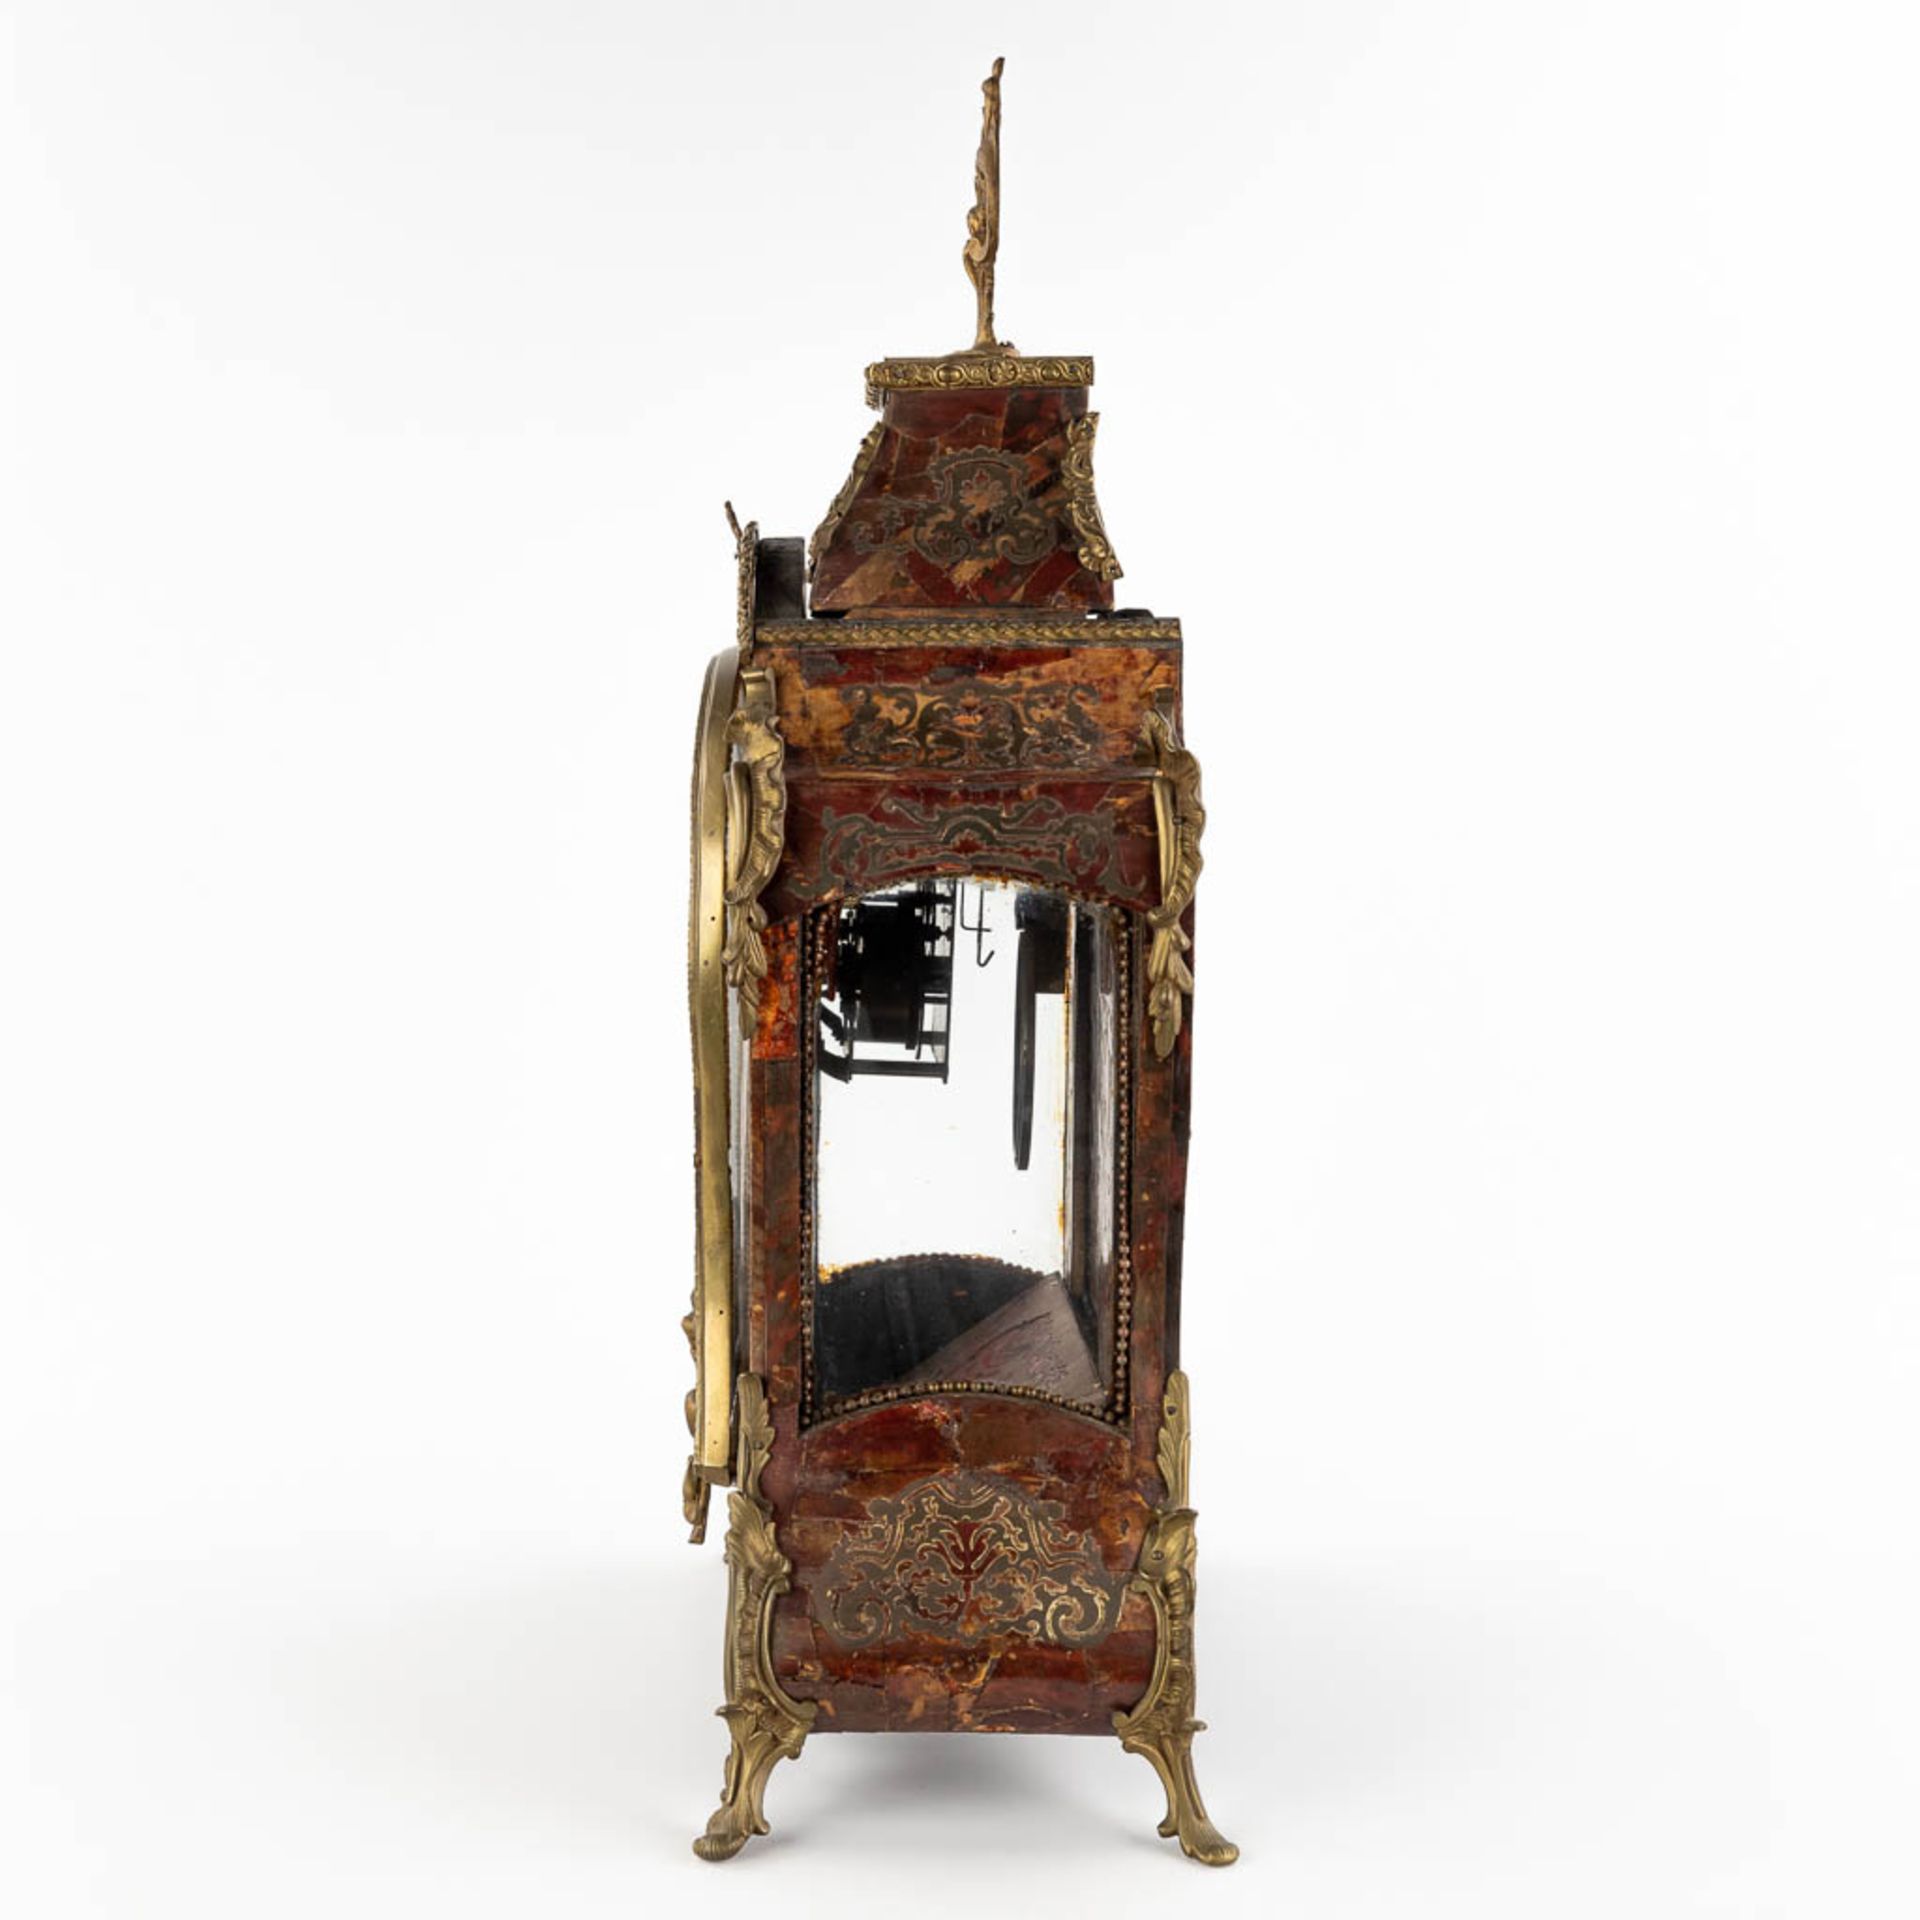 An antique mantle clock, tortoiseshell and copper inlay, early 20th C. (D:18 x W:38 x H:65 cm) - Bild 9 aus 15